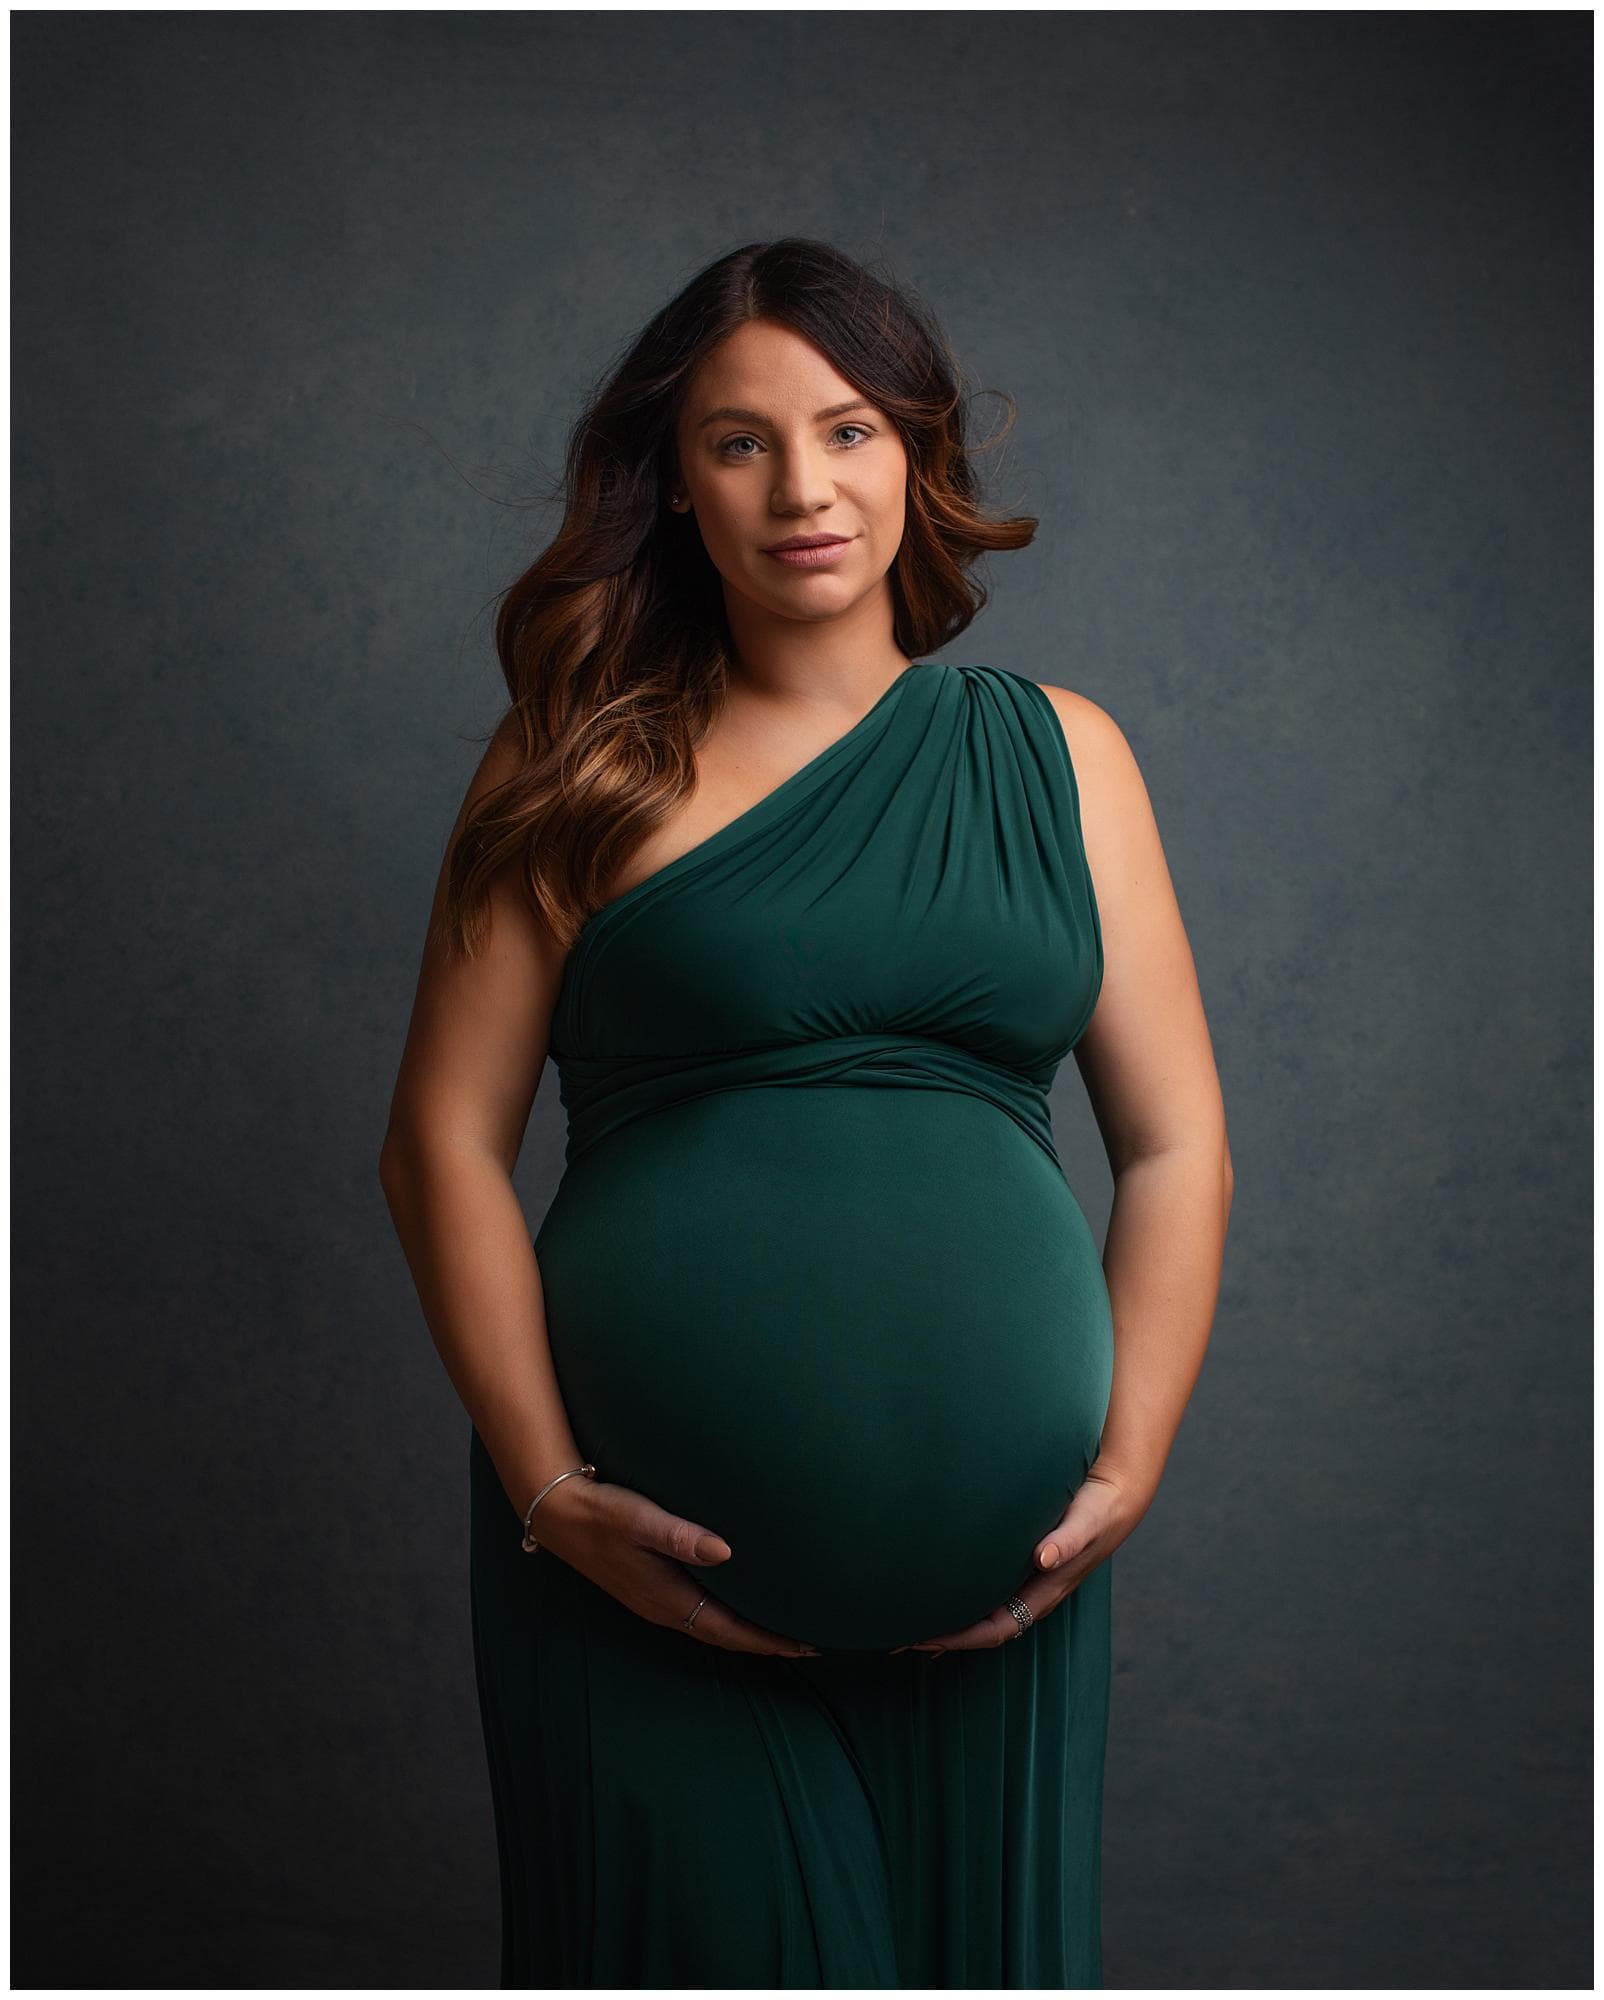 Pregnant woman posing in an emerald green dress for a maternity photoshoot in Alison McKenny's Suffolk studio